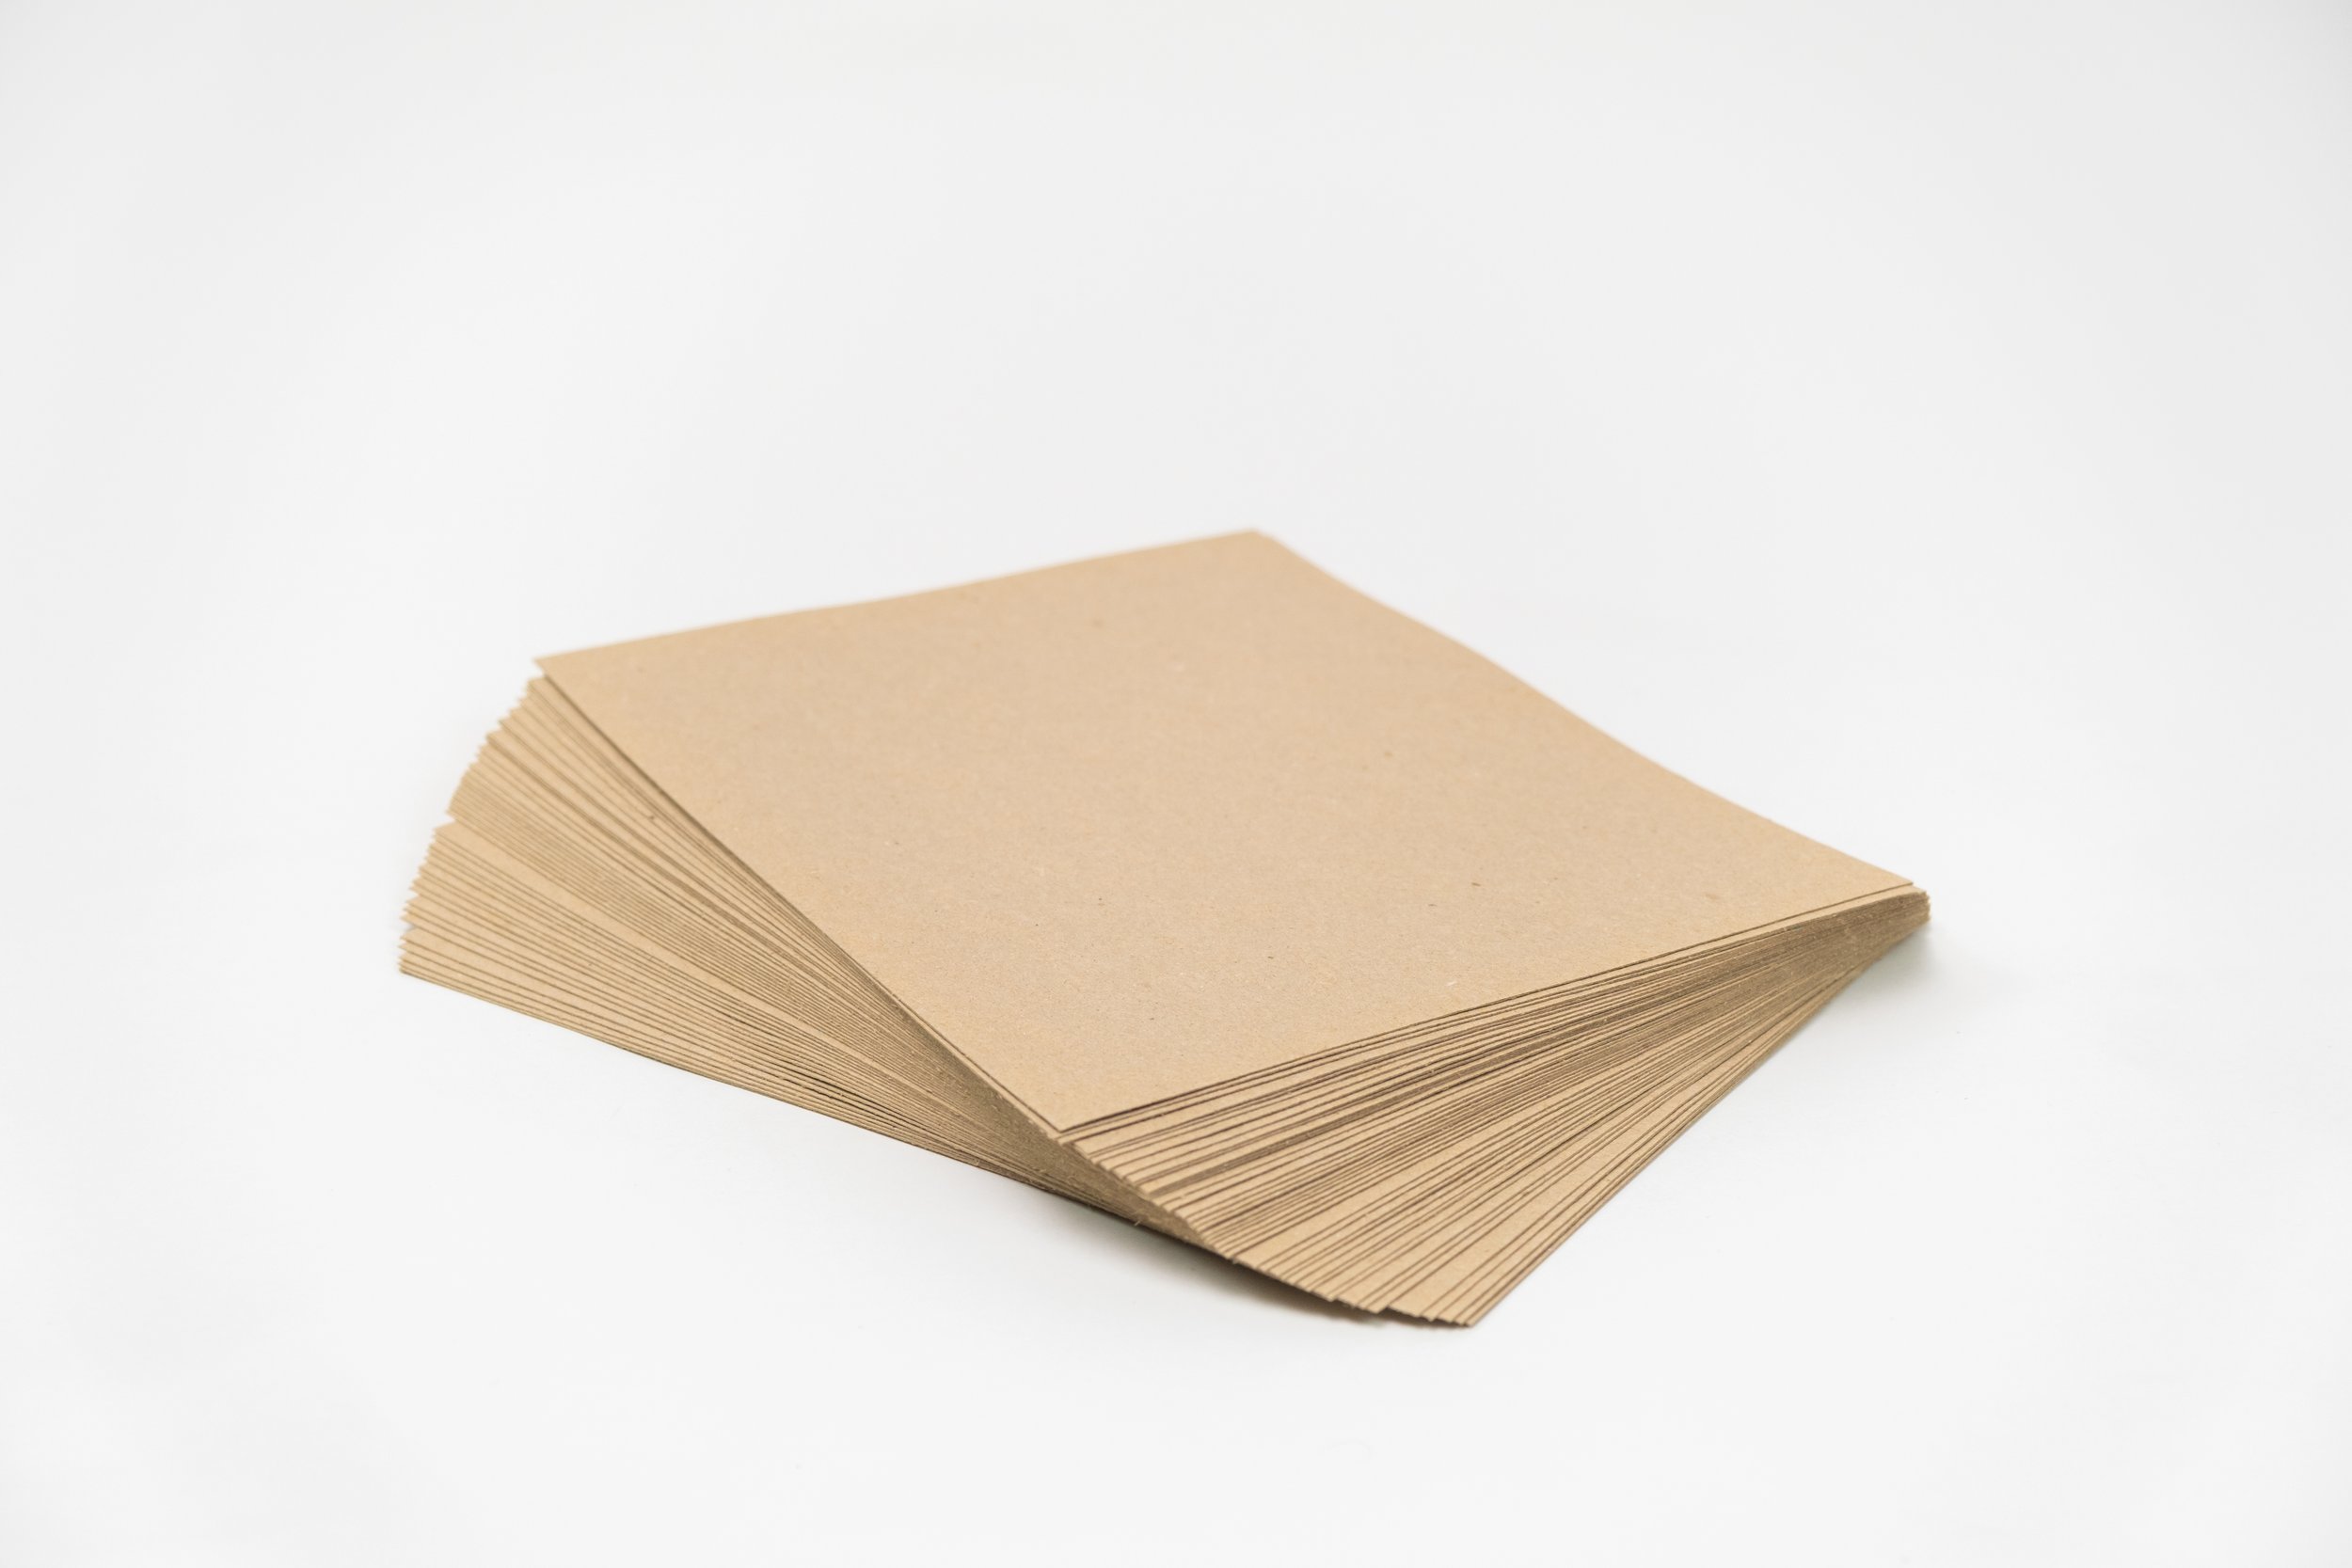 Chipboard Sheets — STRONG PAPER